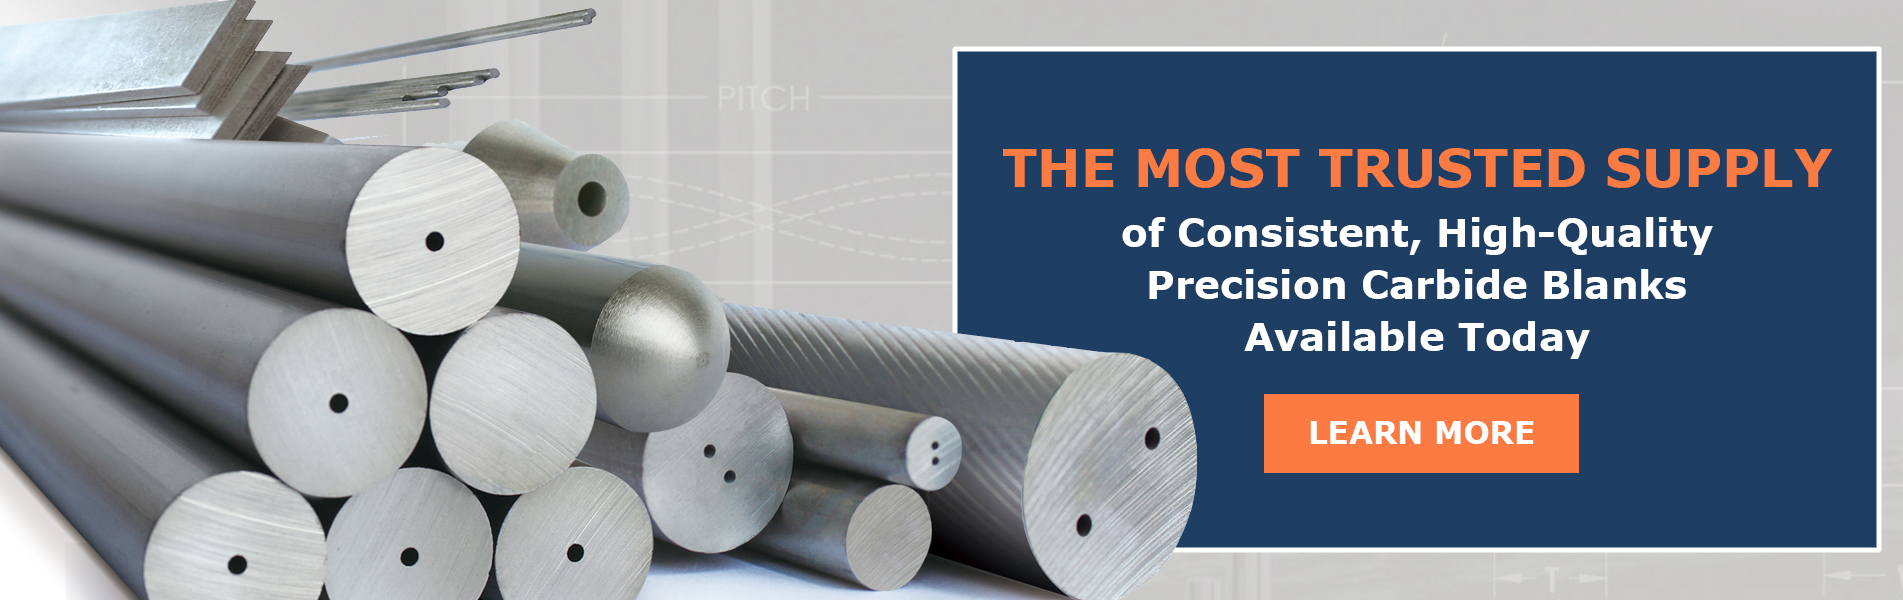 TechMet is North America's #1 Supplier of Carbide Blanks